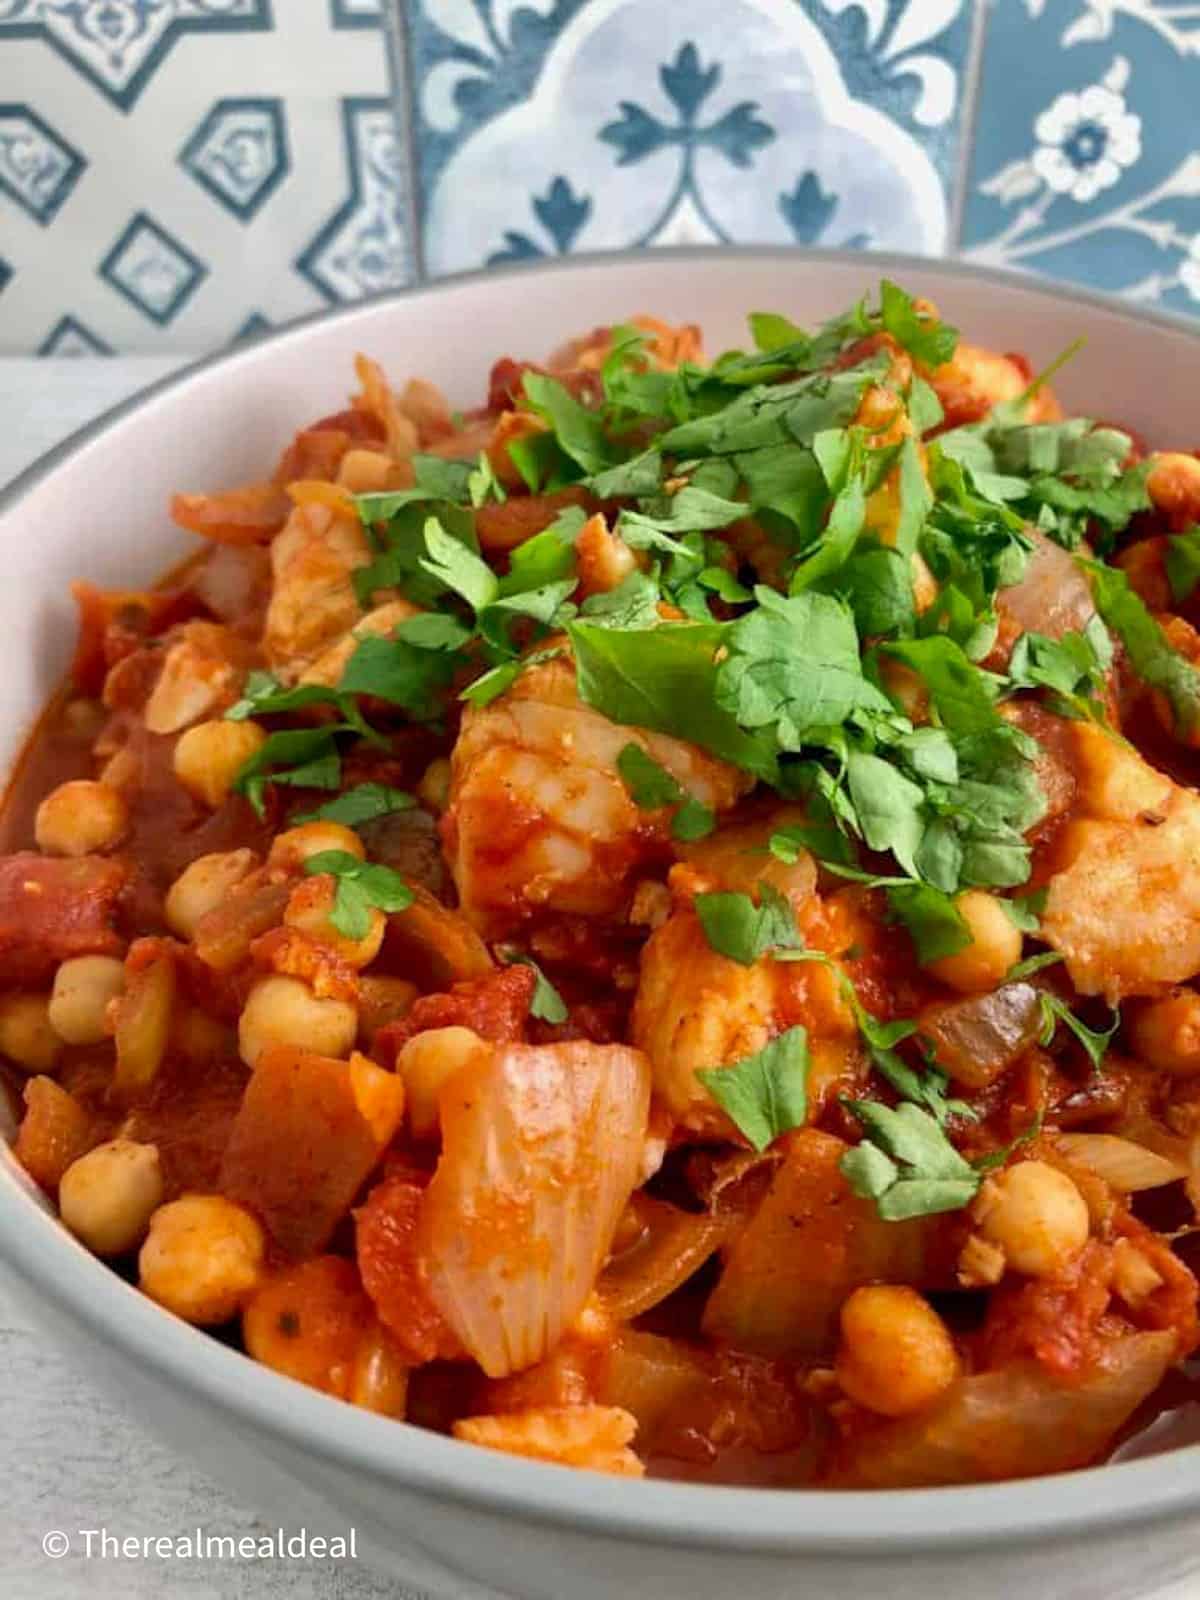 Fish and chickpea stew with sprinkling of fresh parsley